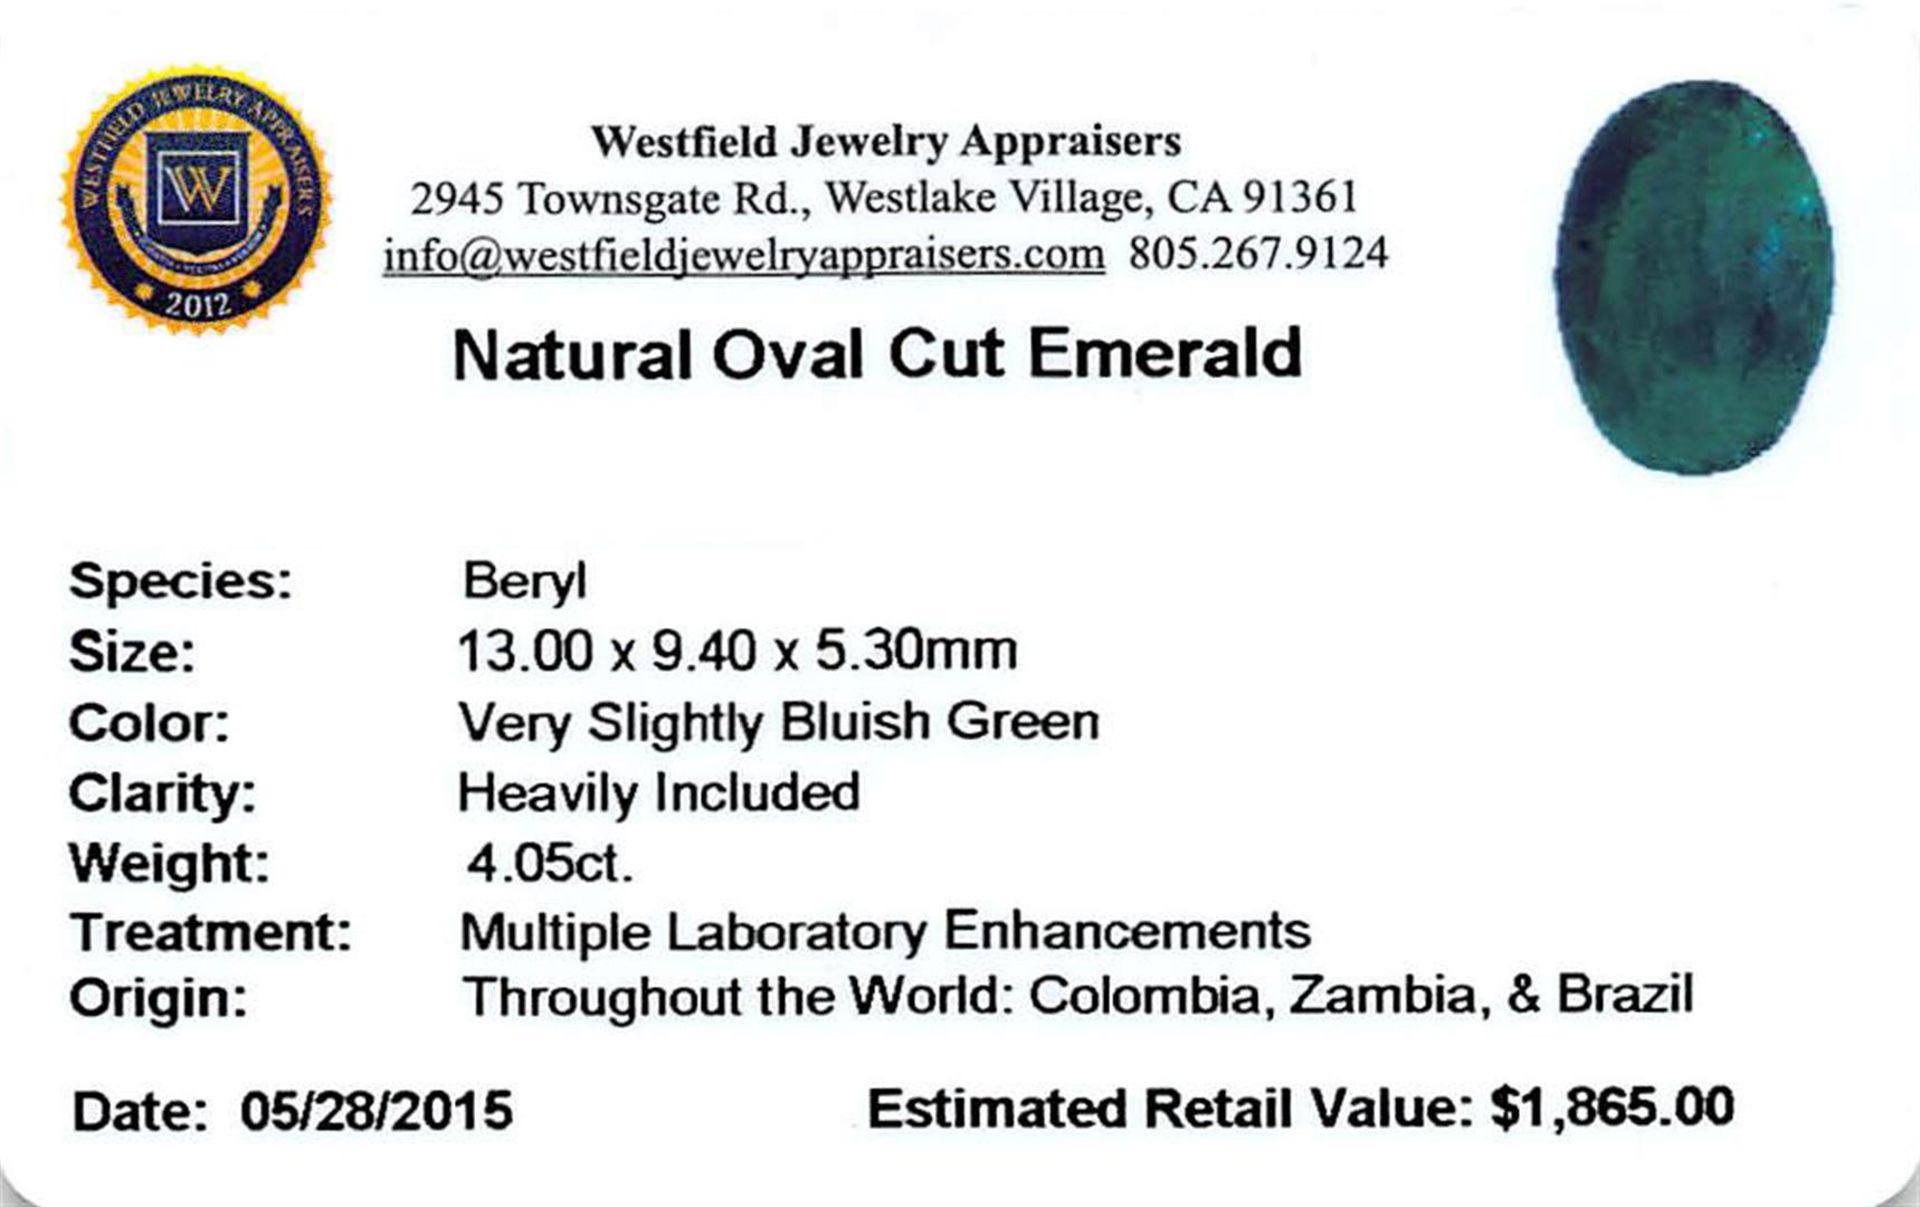 4.05 ctw Oval Emerald Parcel - Image 2 of 2